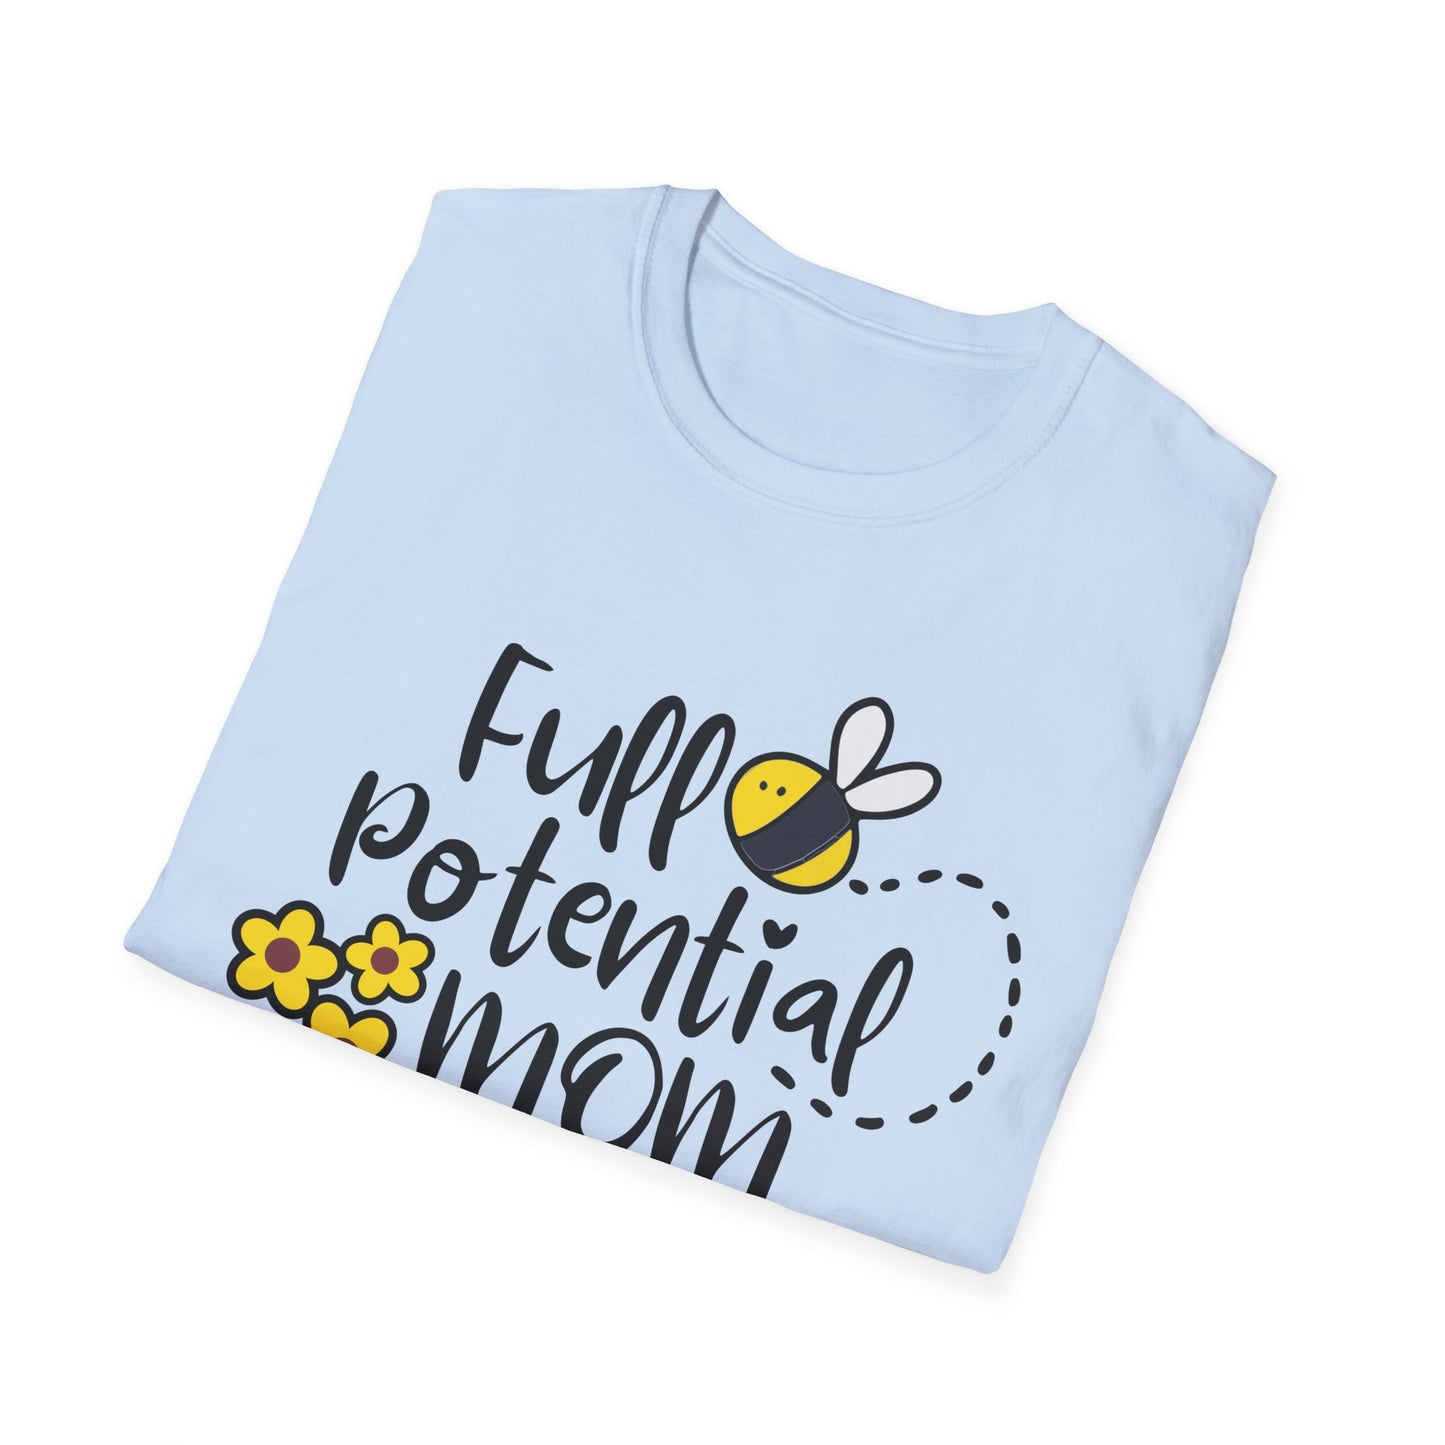 Full Potential Mom Bee Unisex Softstyle T-Shirt